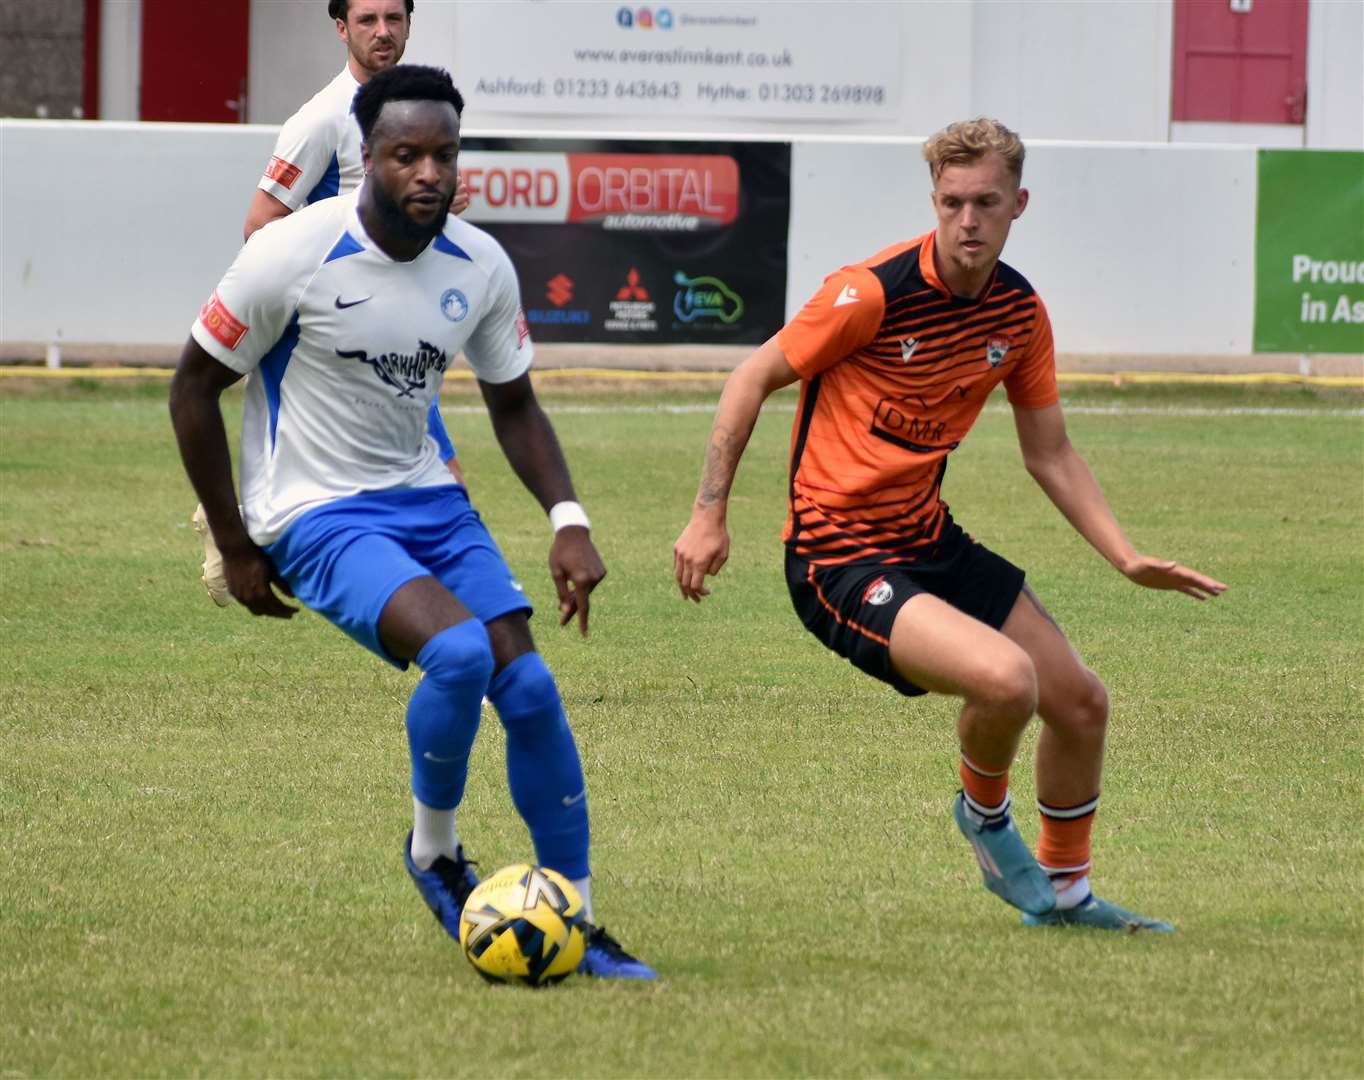 Hythe in possession against Lordswood in a pre-season friendly at Reachfields. Picture: Randolph File